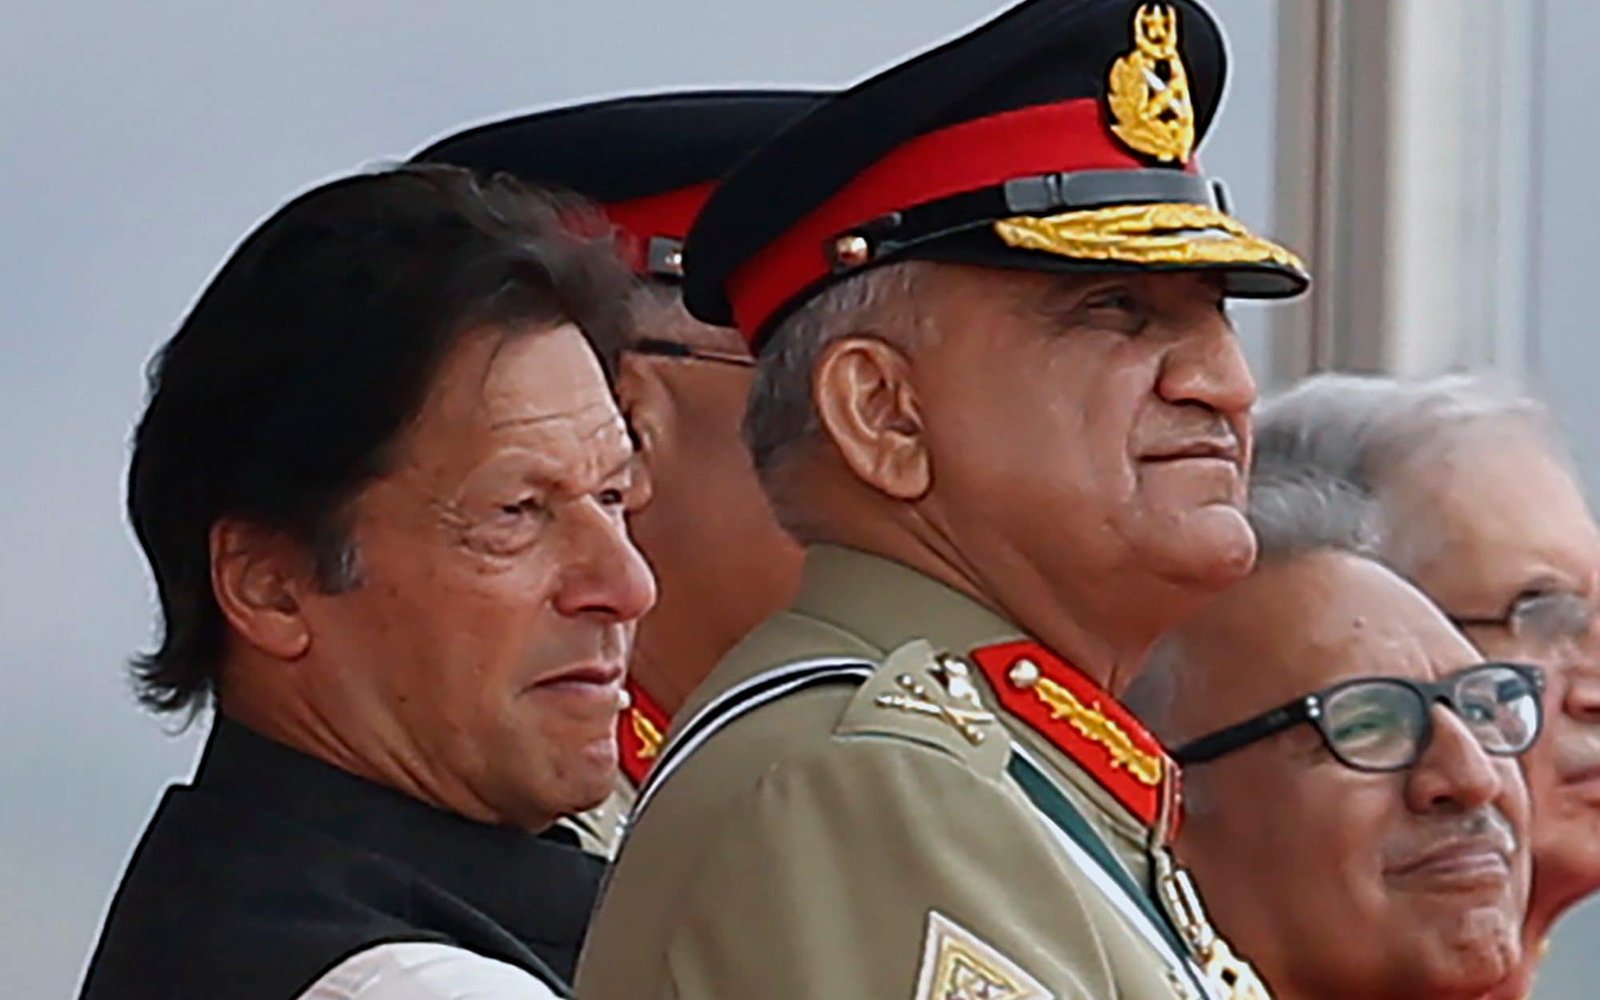 'Martial law or elections – your choice': Khan threatened to impose martial law, states report